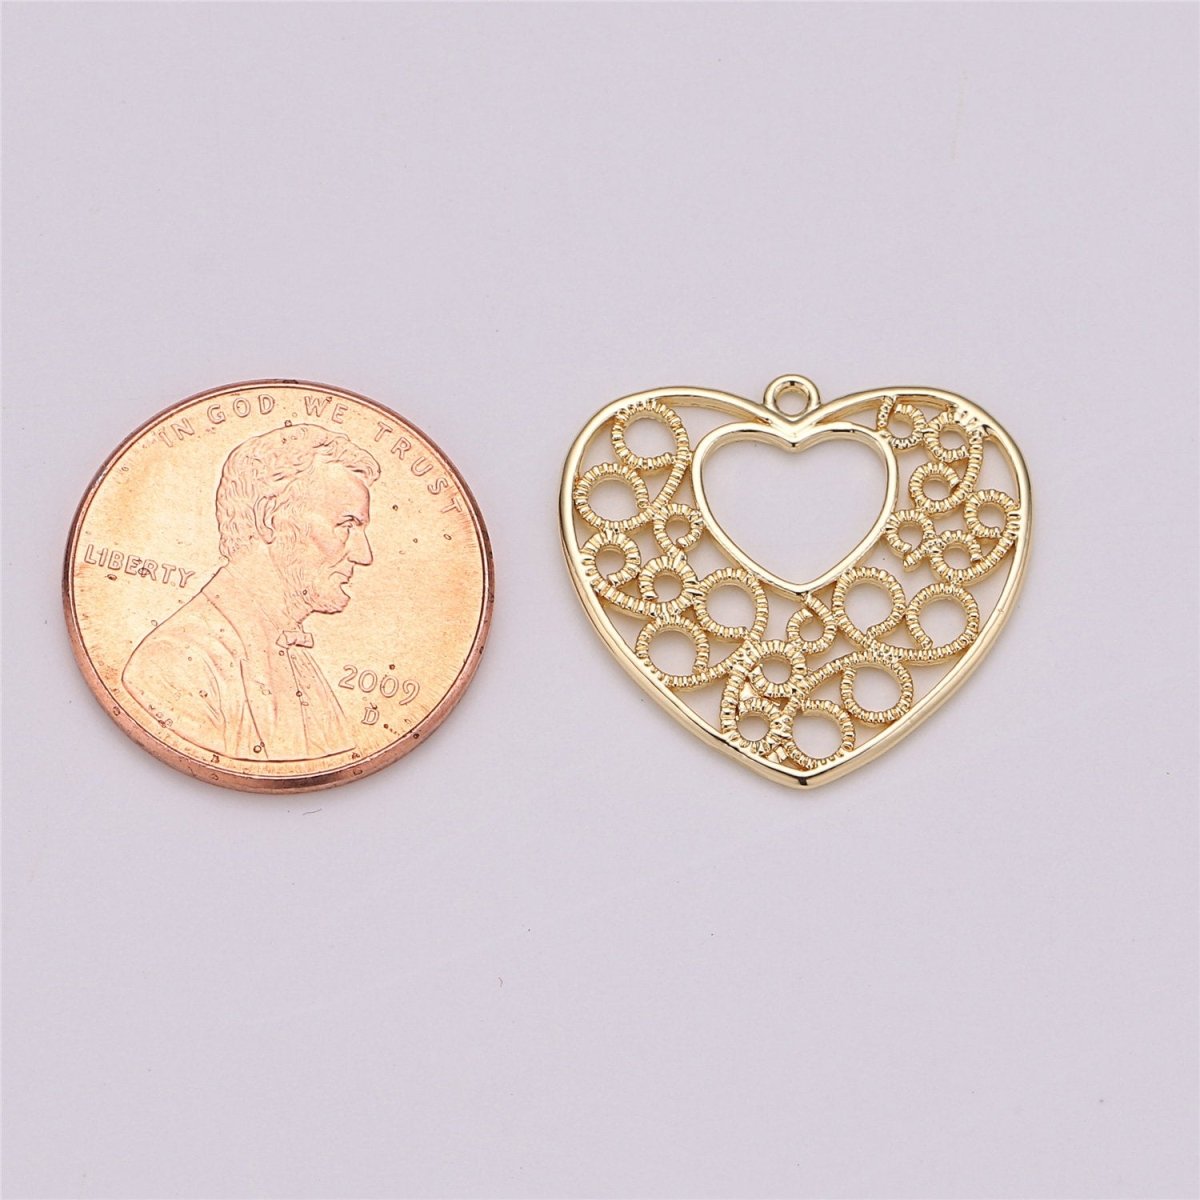 18K Gold Filled Chain Dainty Hearts Charm for Necklace Earring Charm for Jewelry Making Stylish Love Charm Filigree,C-456 - DLUXCA